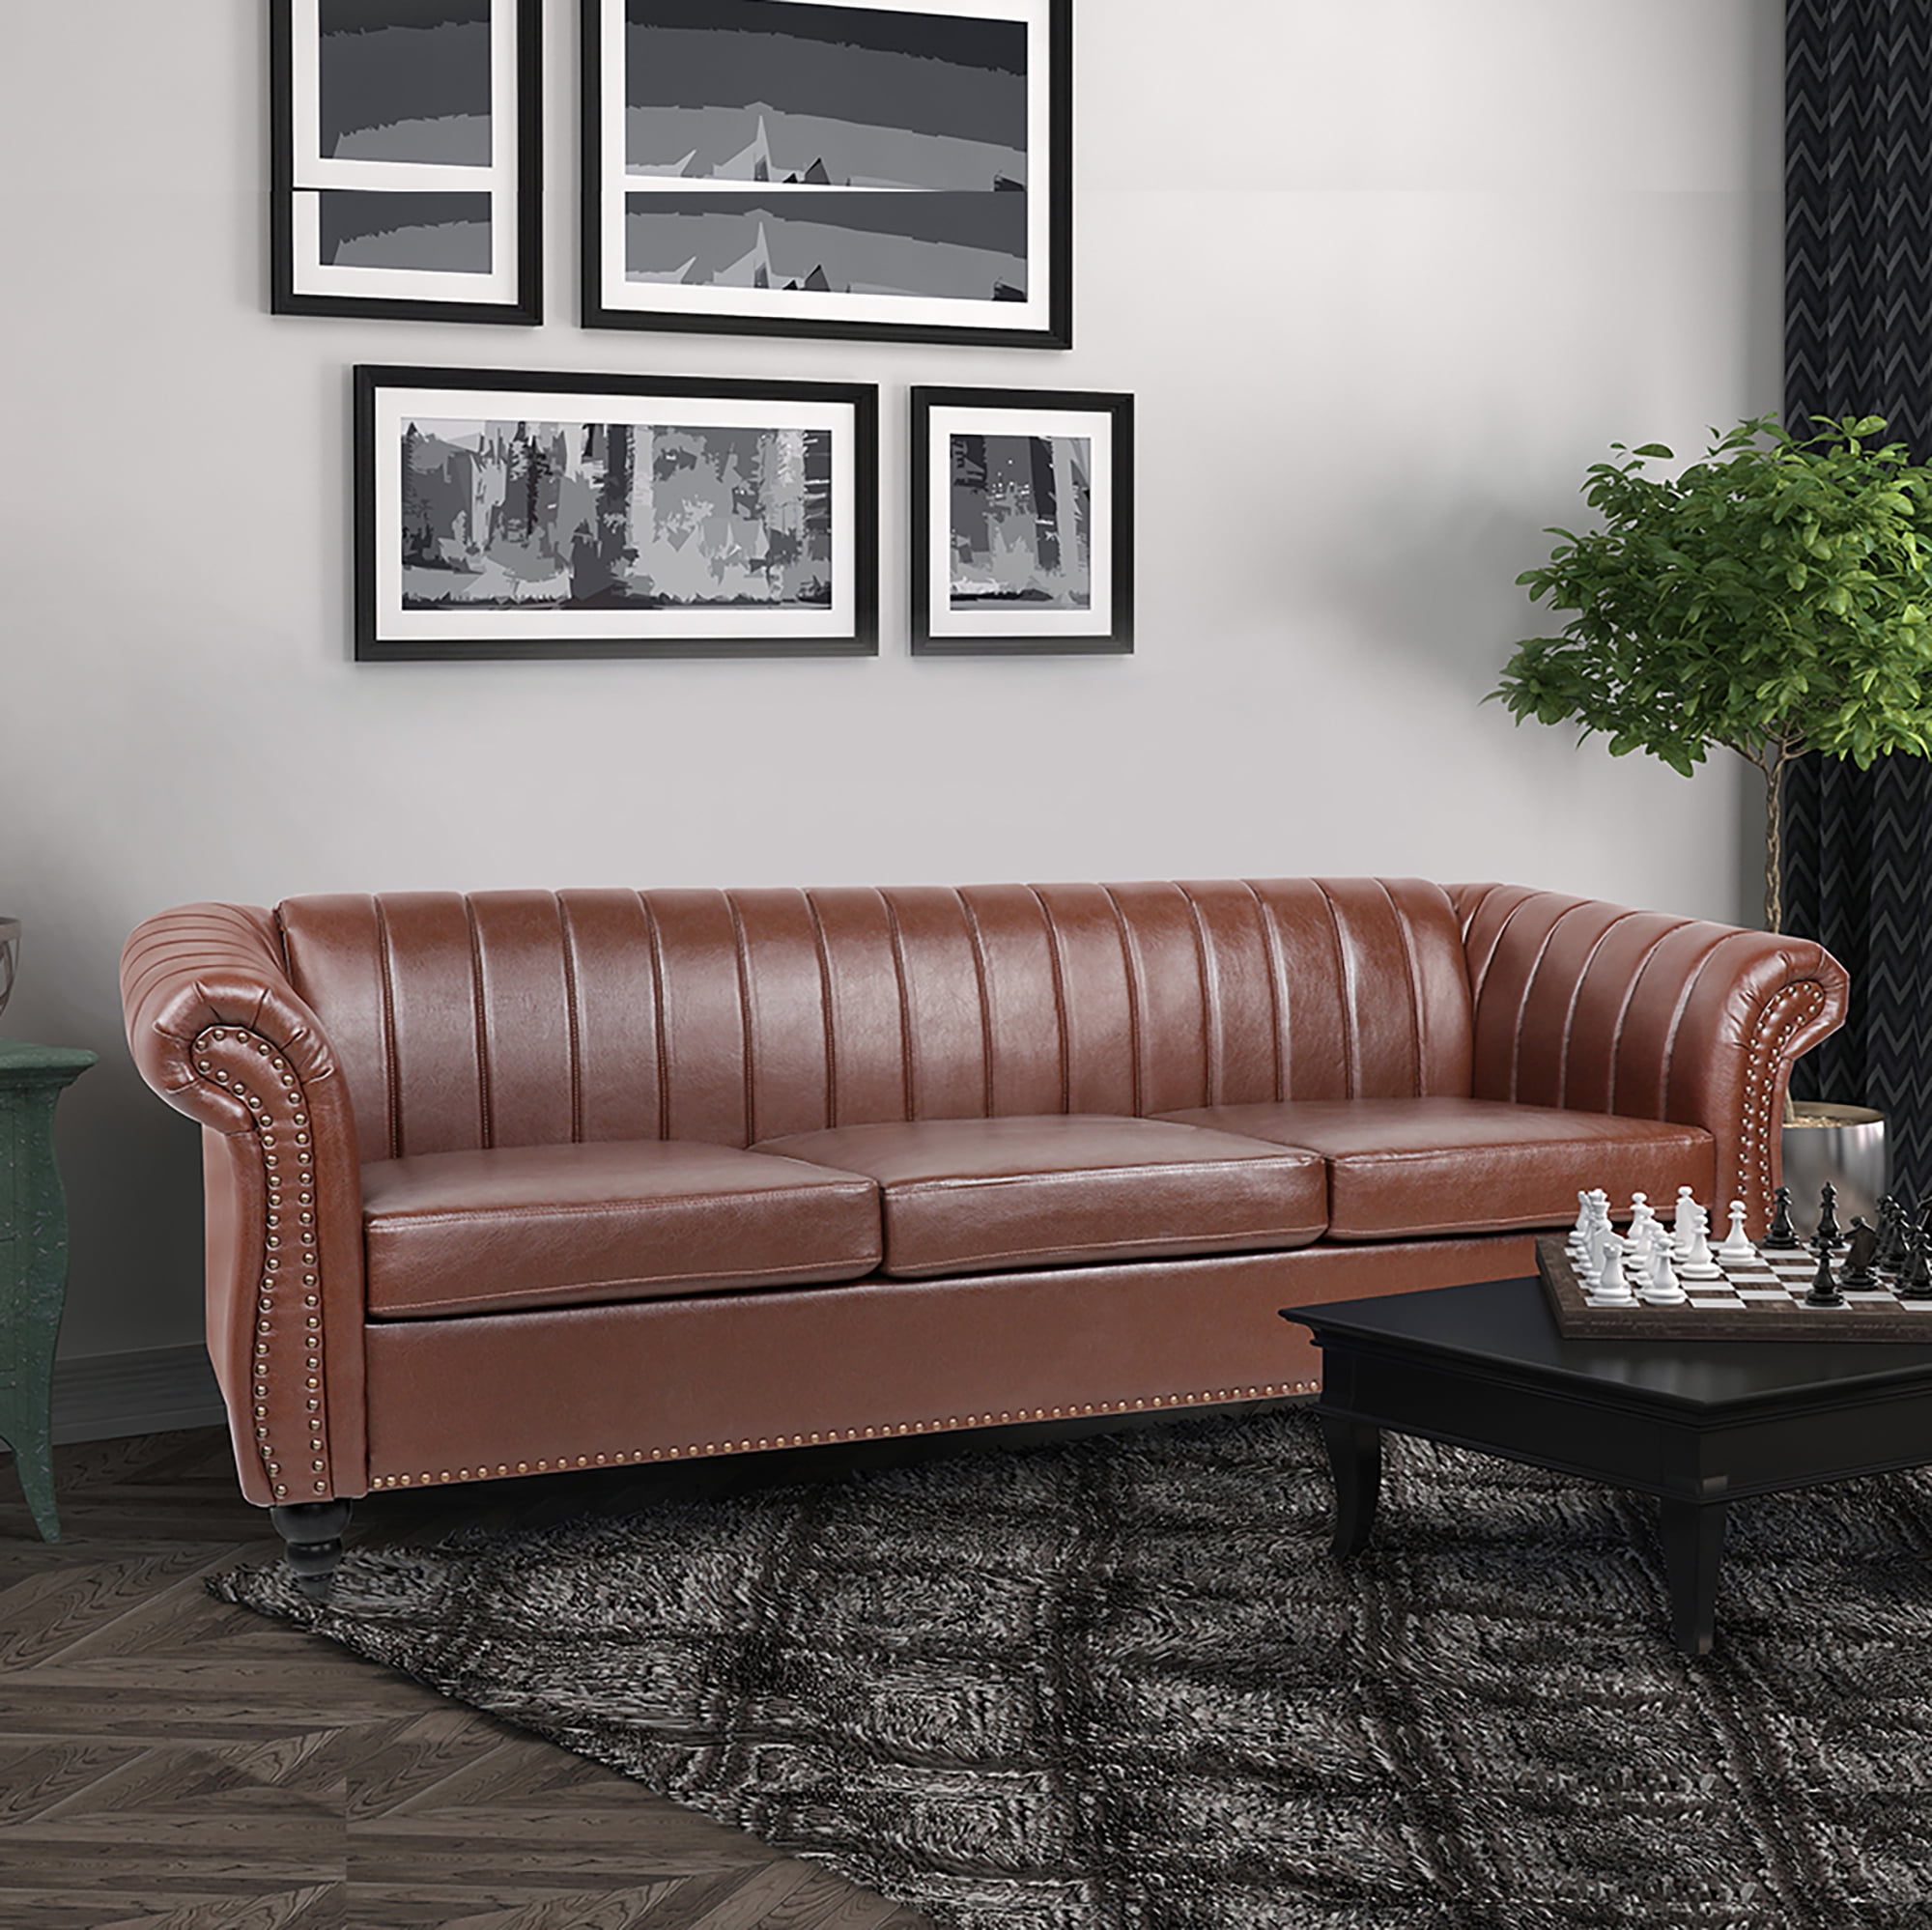 Churanty Chesterfield Leather, PU Sofa with Channel Tufted Back, Classic 3 Seater Leather Couch Roll Arm, Nailhead Trim Sofa Solid Legs and Removable Cushion,Dark Brown - Walmart.com